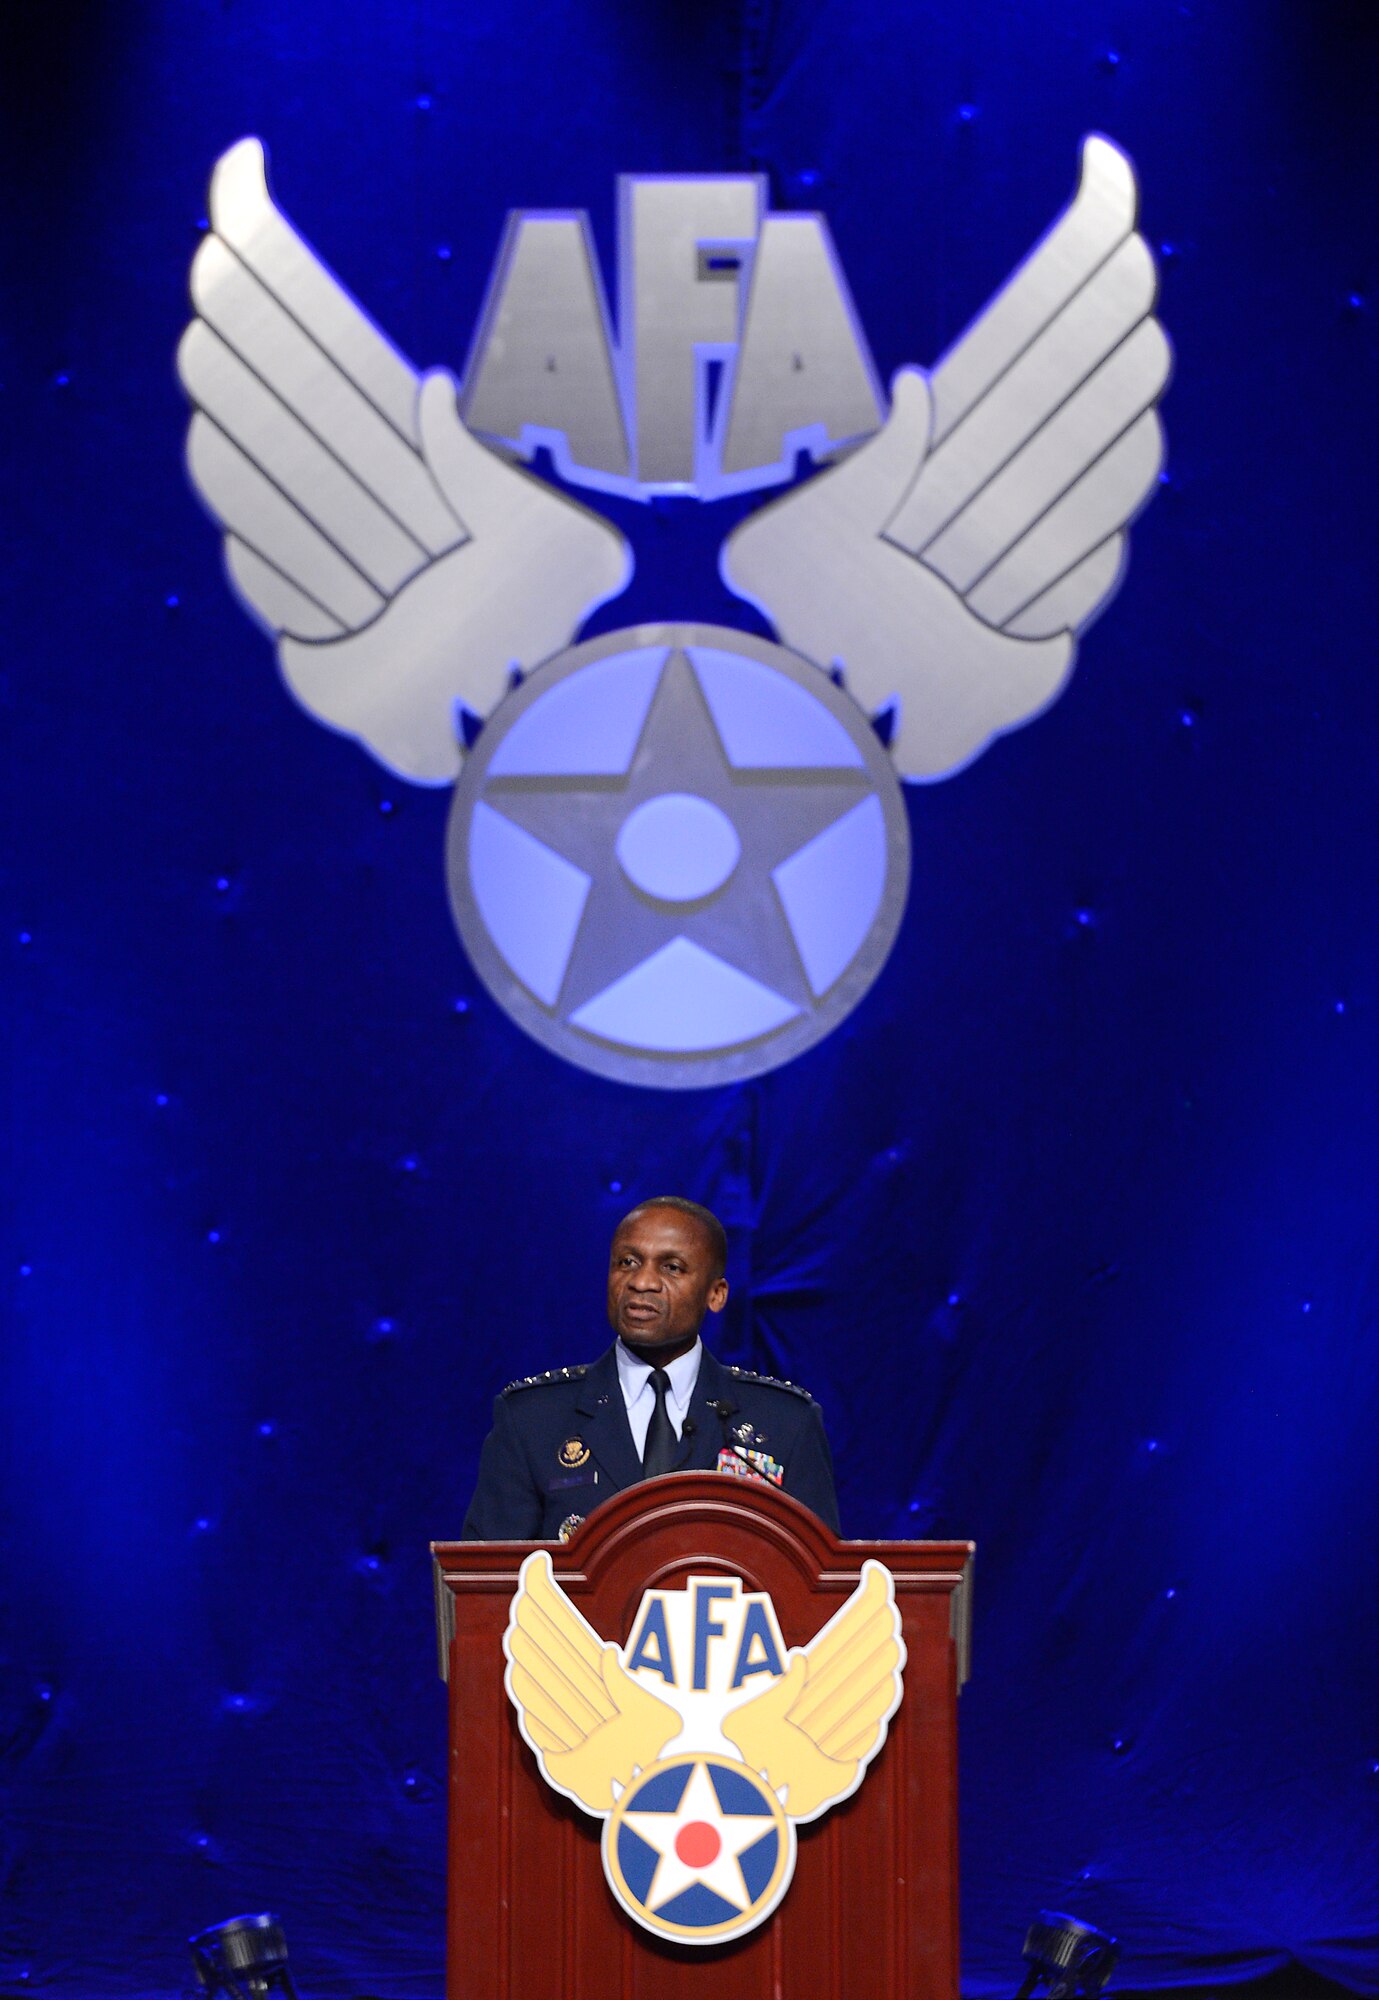 Gen. Darren McDew, the commander of Air Mobility Command, discusses AMC's mission and priorities, as well as ongoing support to operations in Iraq, during Air Force Association's Air and Space Conference and Technology Exposition Sept. 16, 2014 in Washington, D.C.  (U.S. Air Force photo/Scott M. Ash)